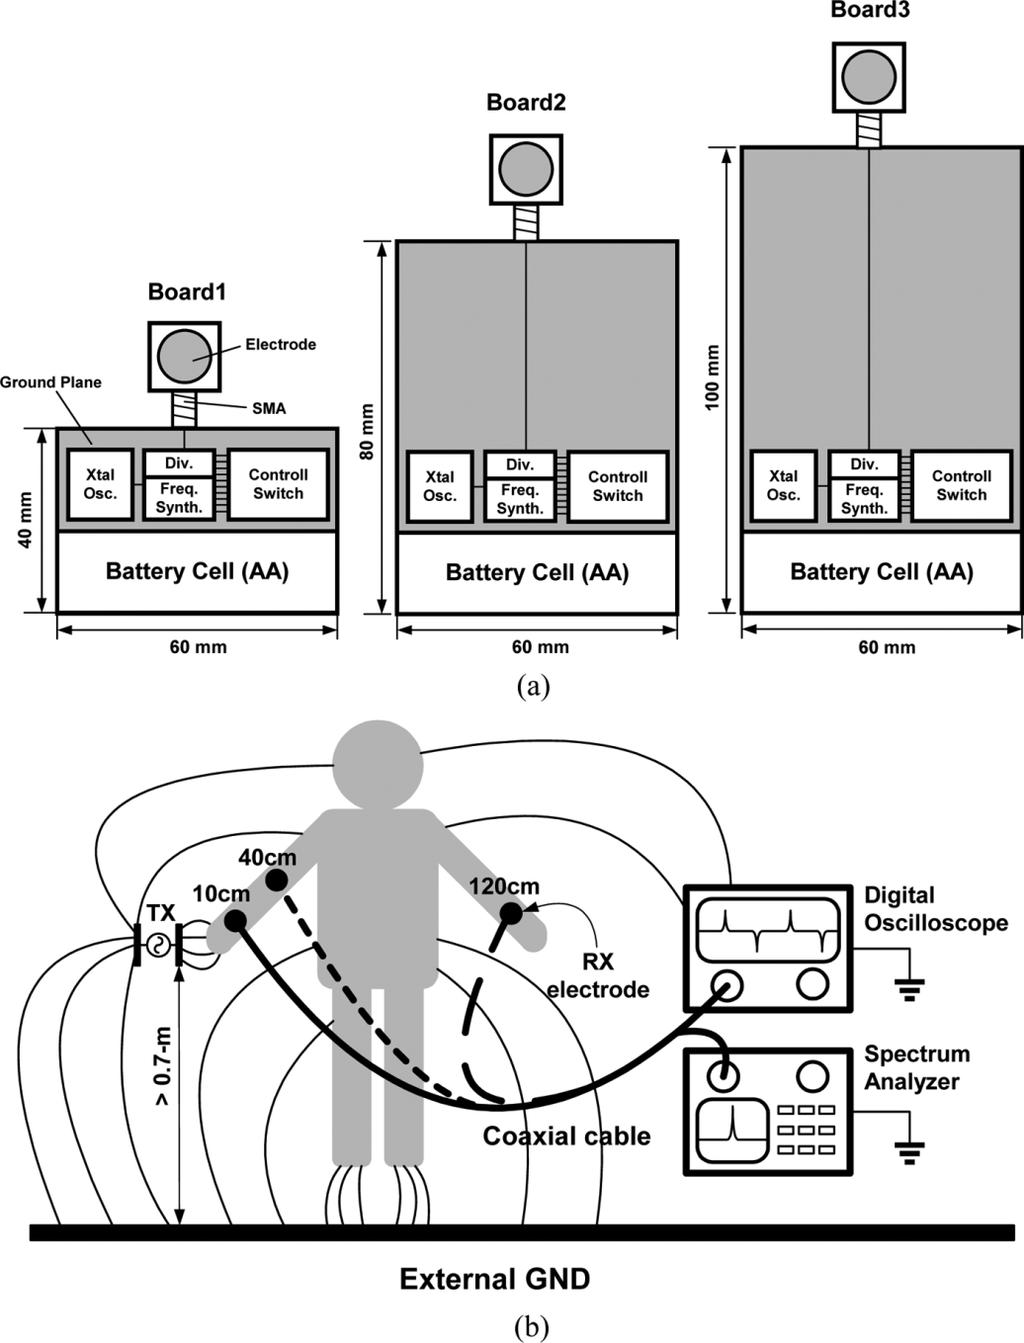 1082 IEEE TRANSACTIONS ON MICROWAVE THEORY AND TECHNIQUES, VOL. 55, NO. 5, MAY 2007 Fig. 3. Experimental setup for the body channel measurement. (a) Transmitter boards. (b) Experimental configuration.